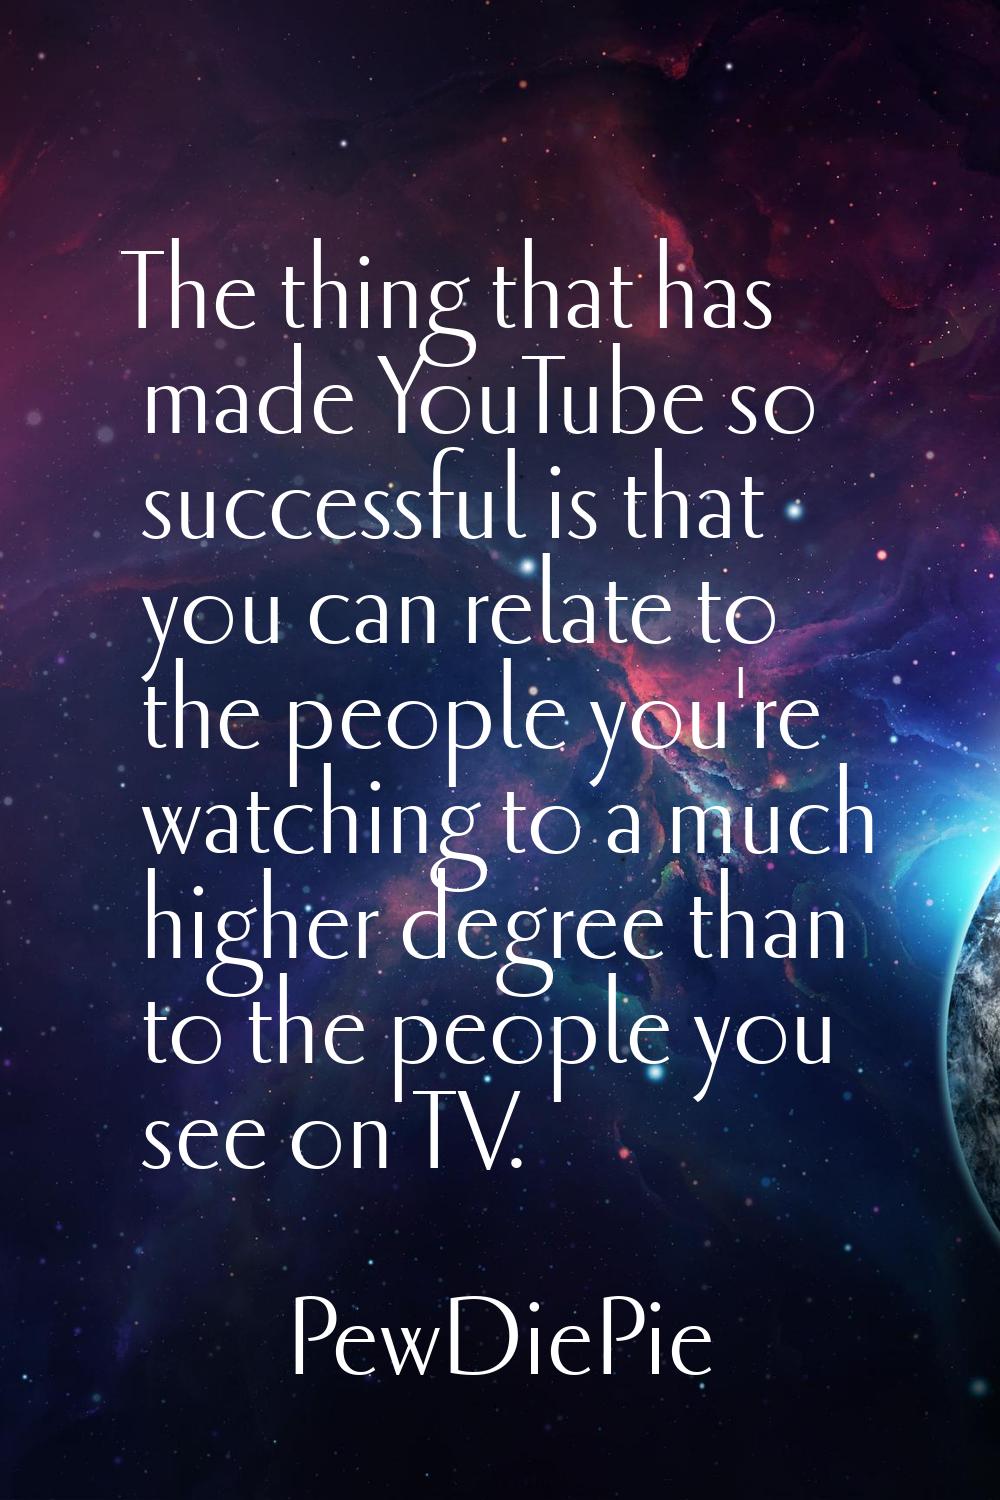 The thing that has made YouTube so successful is that you can relate to the people you're watching 